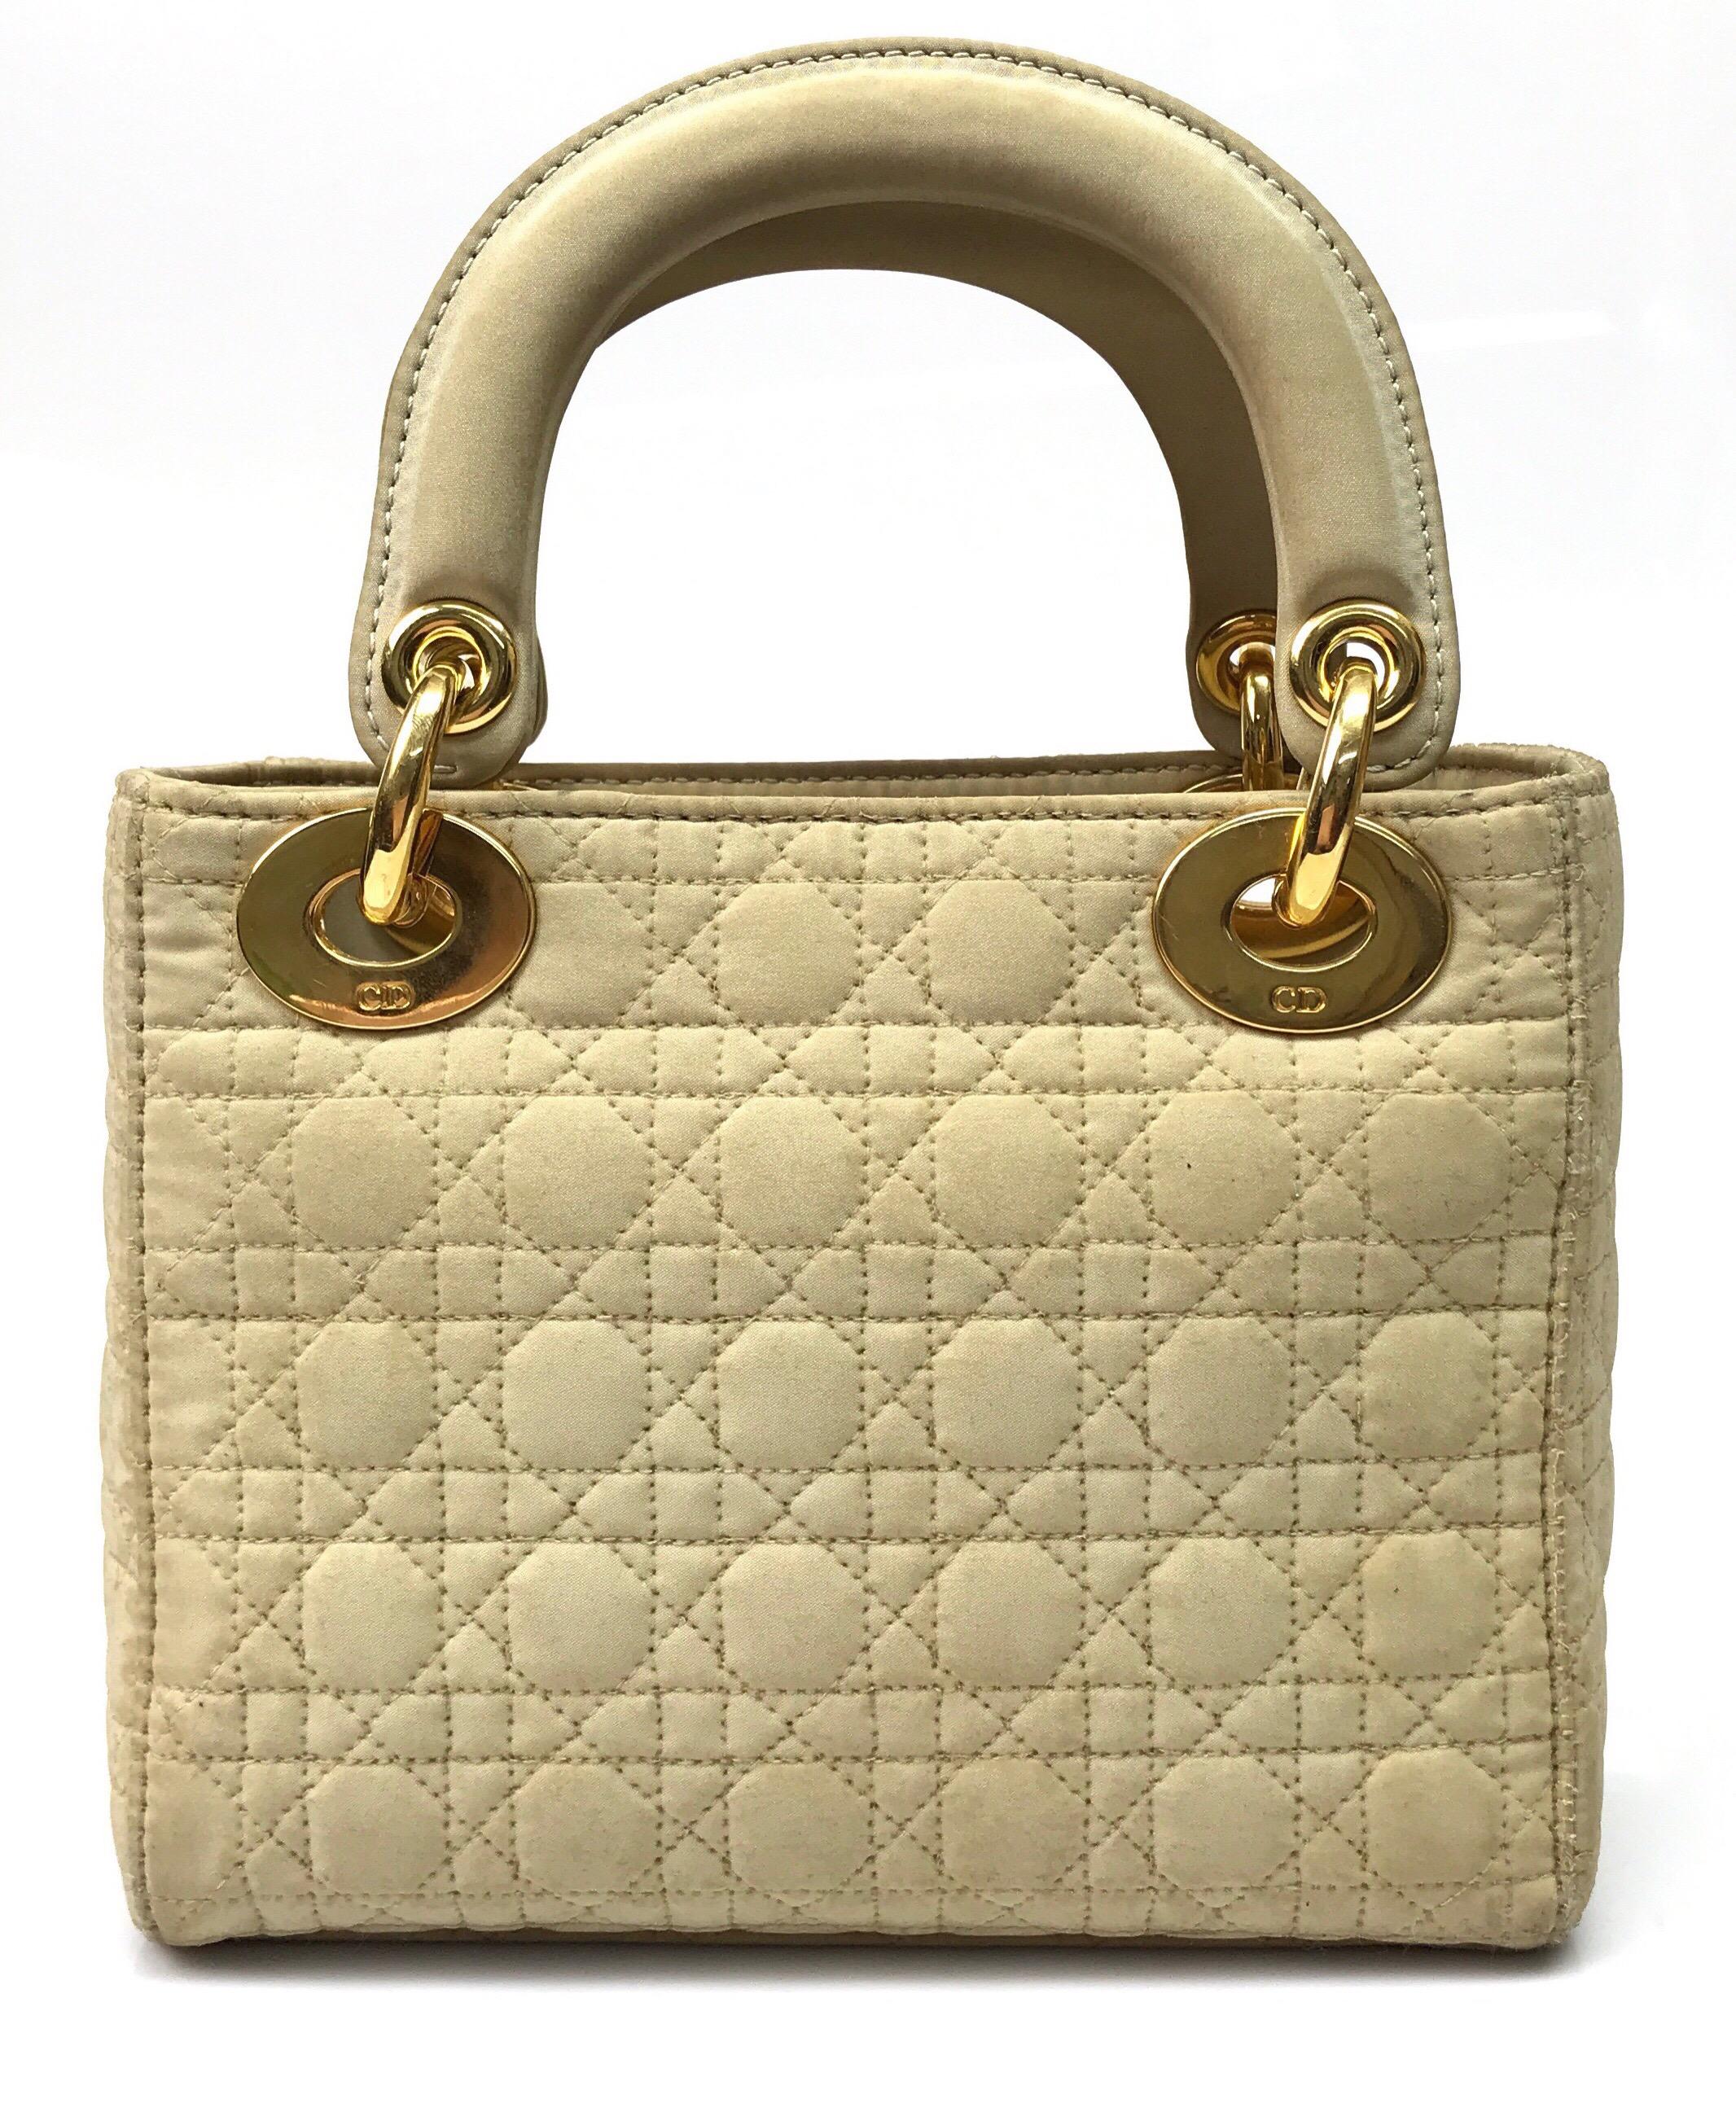 CHRISTIAN DIOR  Nude Fabric Small Lady Dior Handbag. This adorable Christian Dior Lady Dior  handbag is in good condition. The item does show some sign of use with some fading of the leather and aging that consists of a sticky feeling throughout the